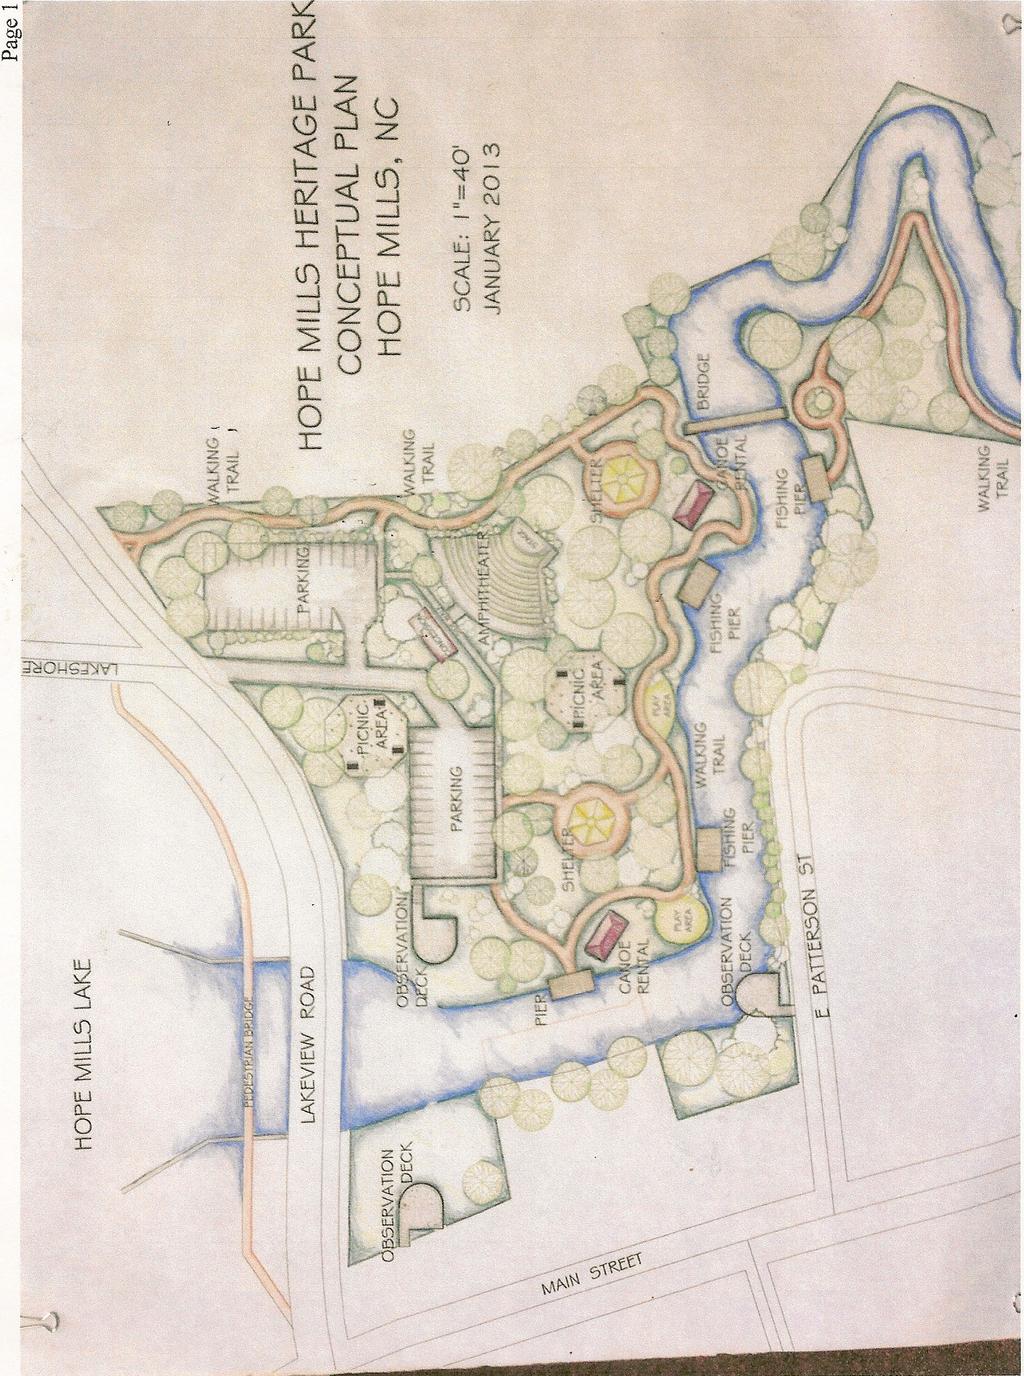 Figure 17 The proposed conceptual plan drawn